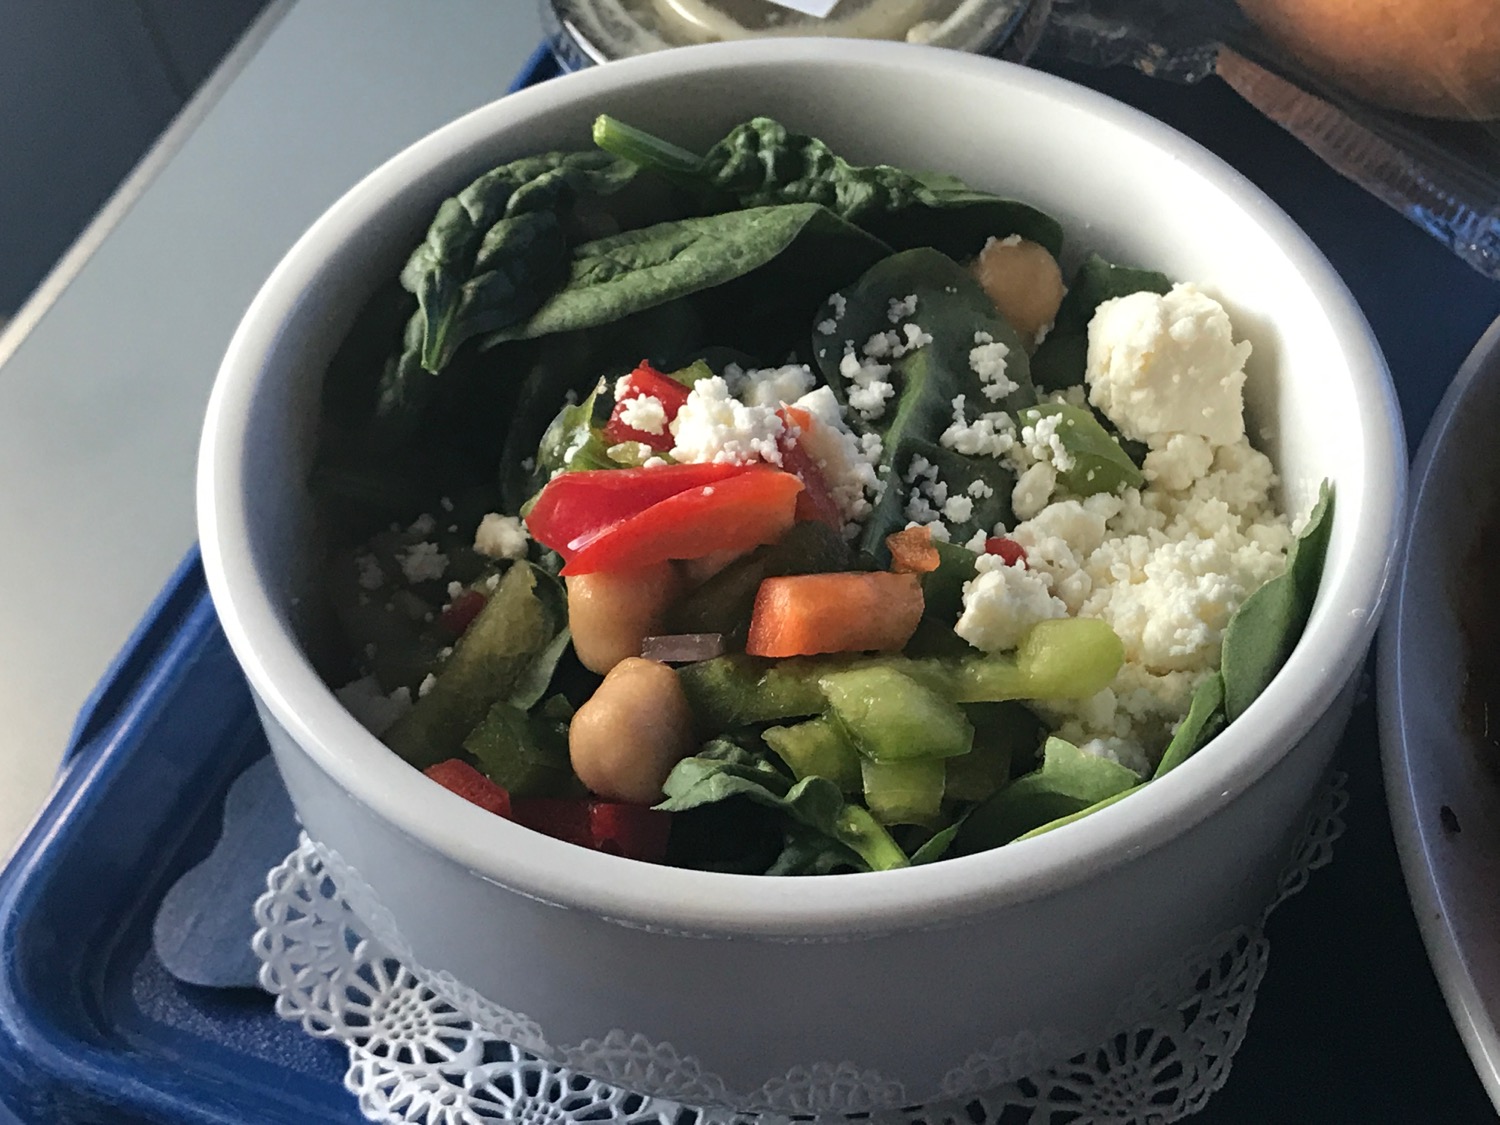 a bowl of salad with vegetables and cheese